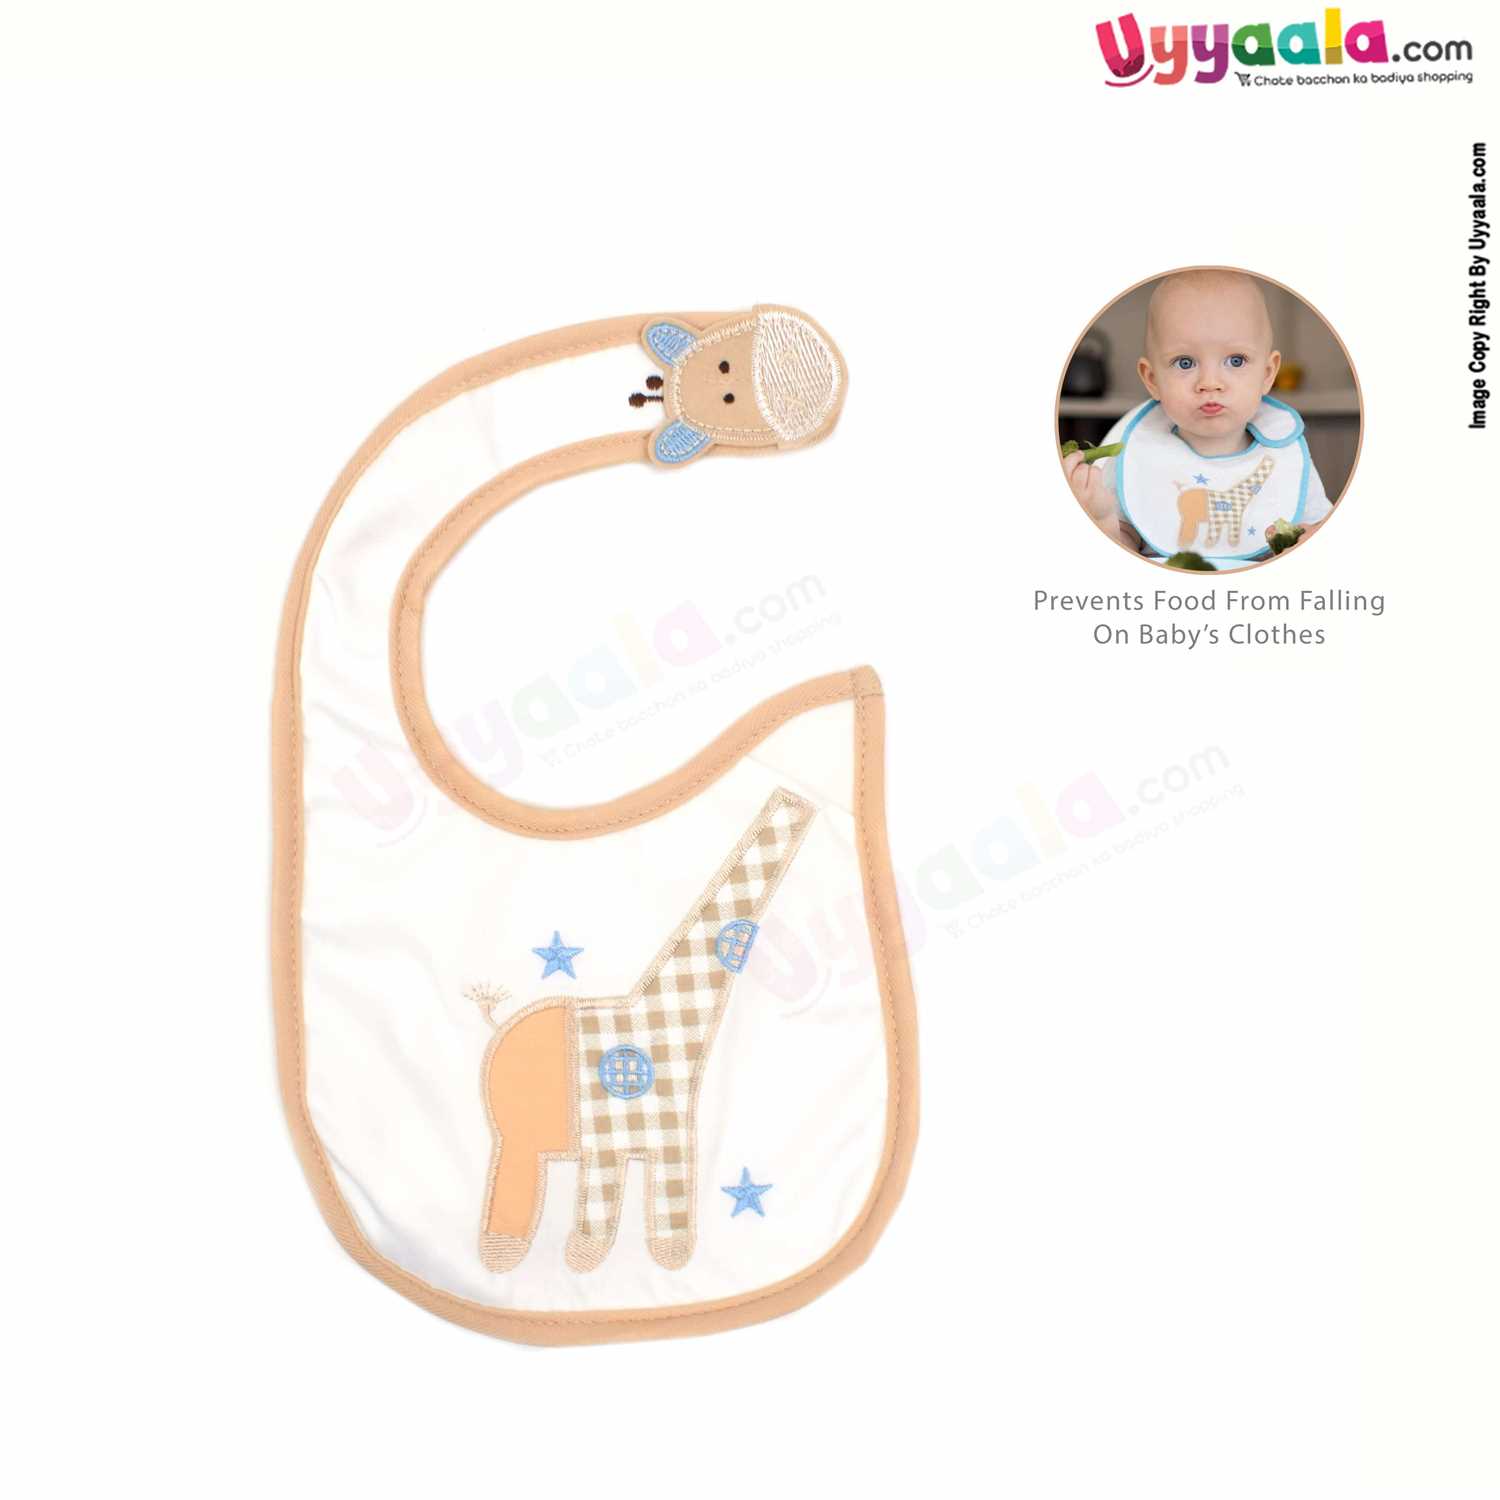 Baby Bib One Side Soft Cotton Hosiery & Another Side Pvc with Giraffe Print Size (24*19cm)- Brown & White